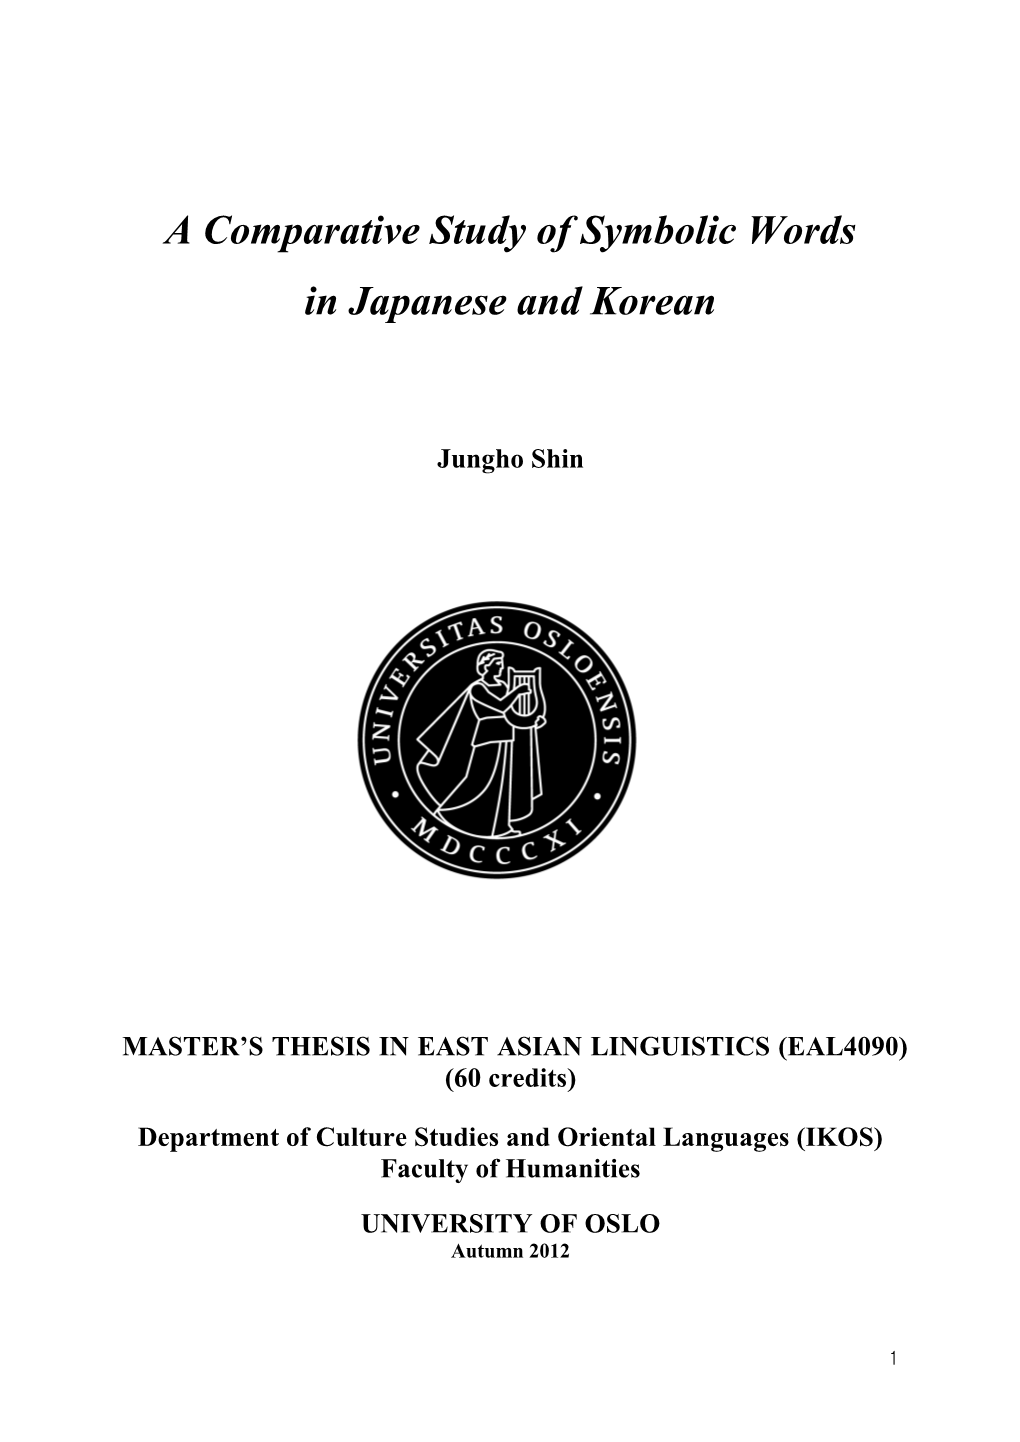 A Comparative Study of Symbolic Words in Japanese and Korean